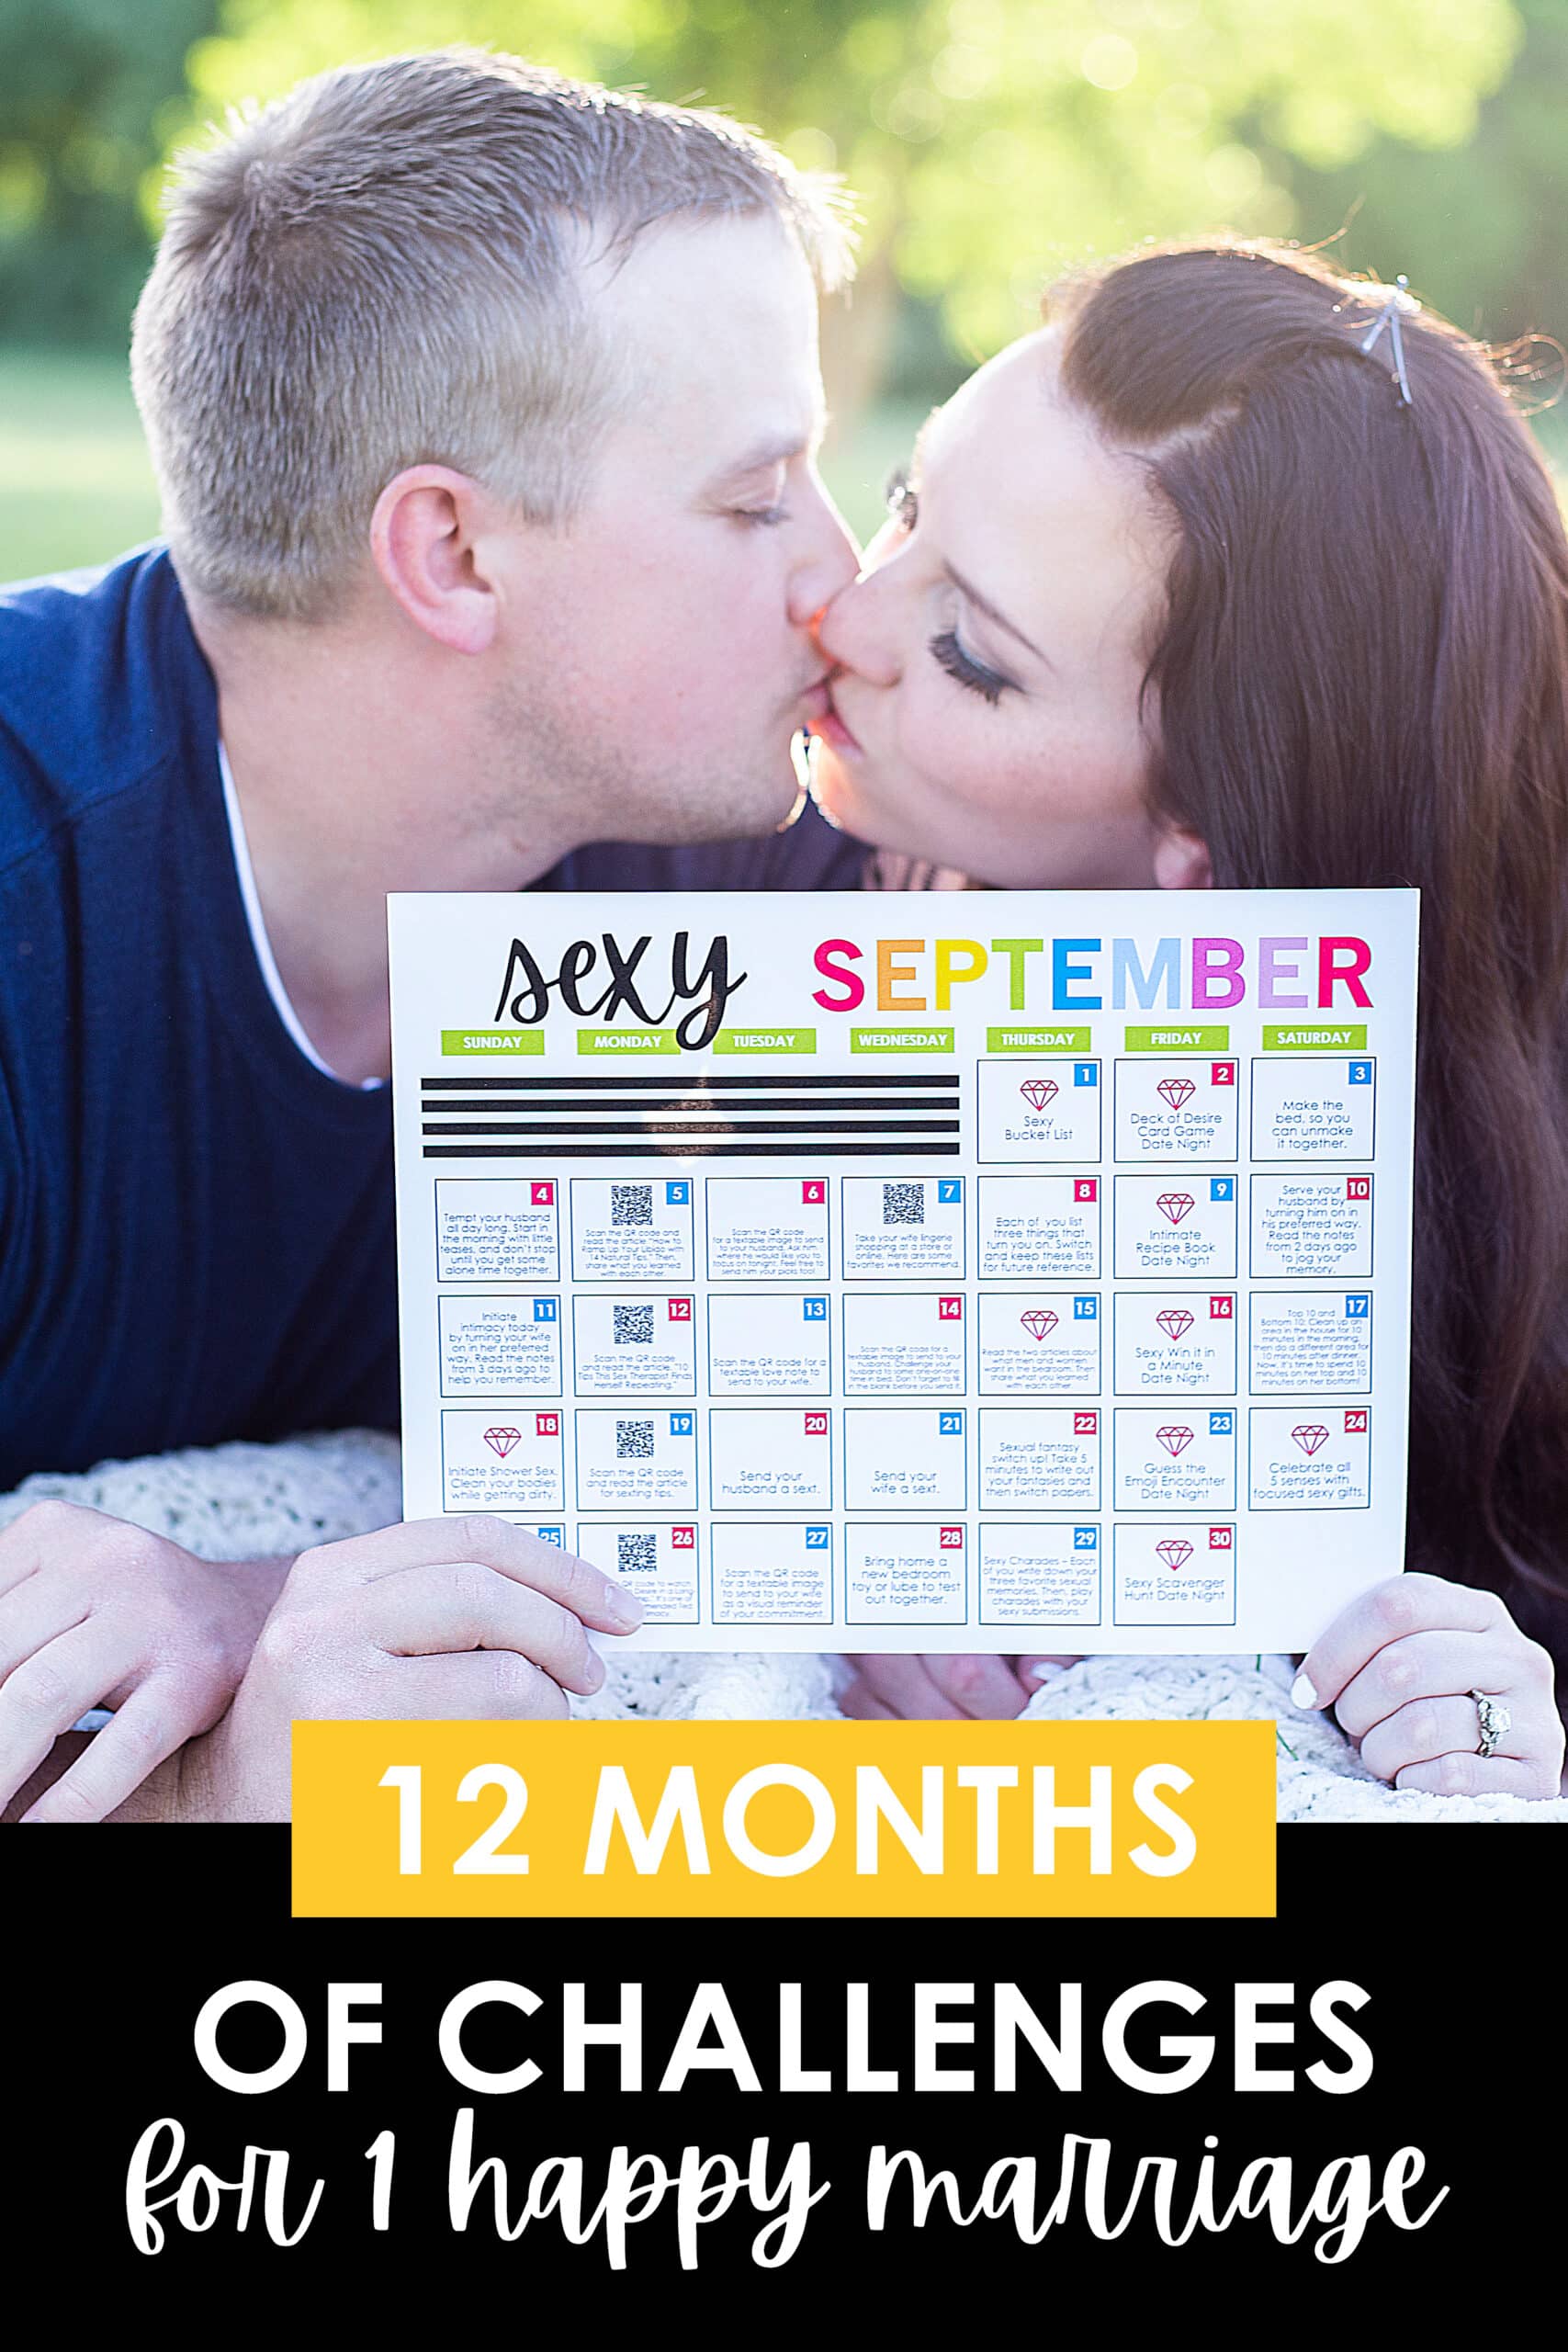 Monthly Romance Calendar for Couples in Love Relationships & Dating